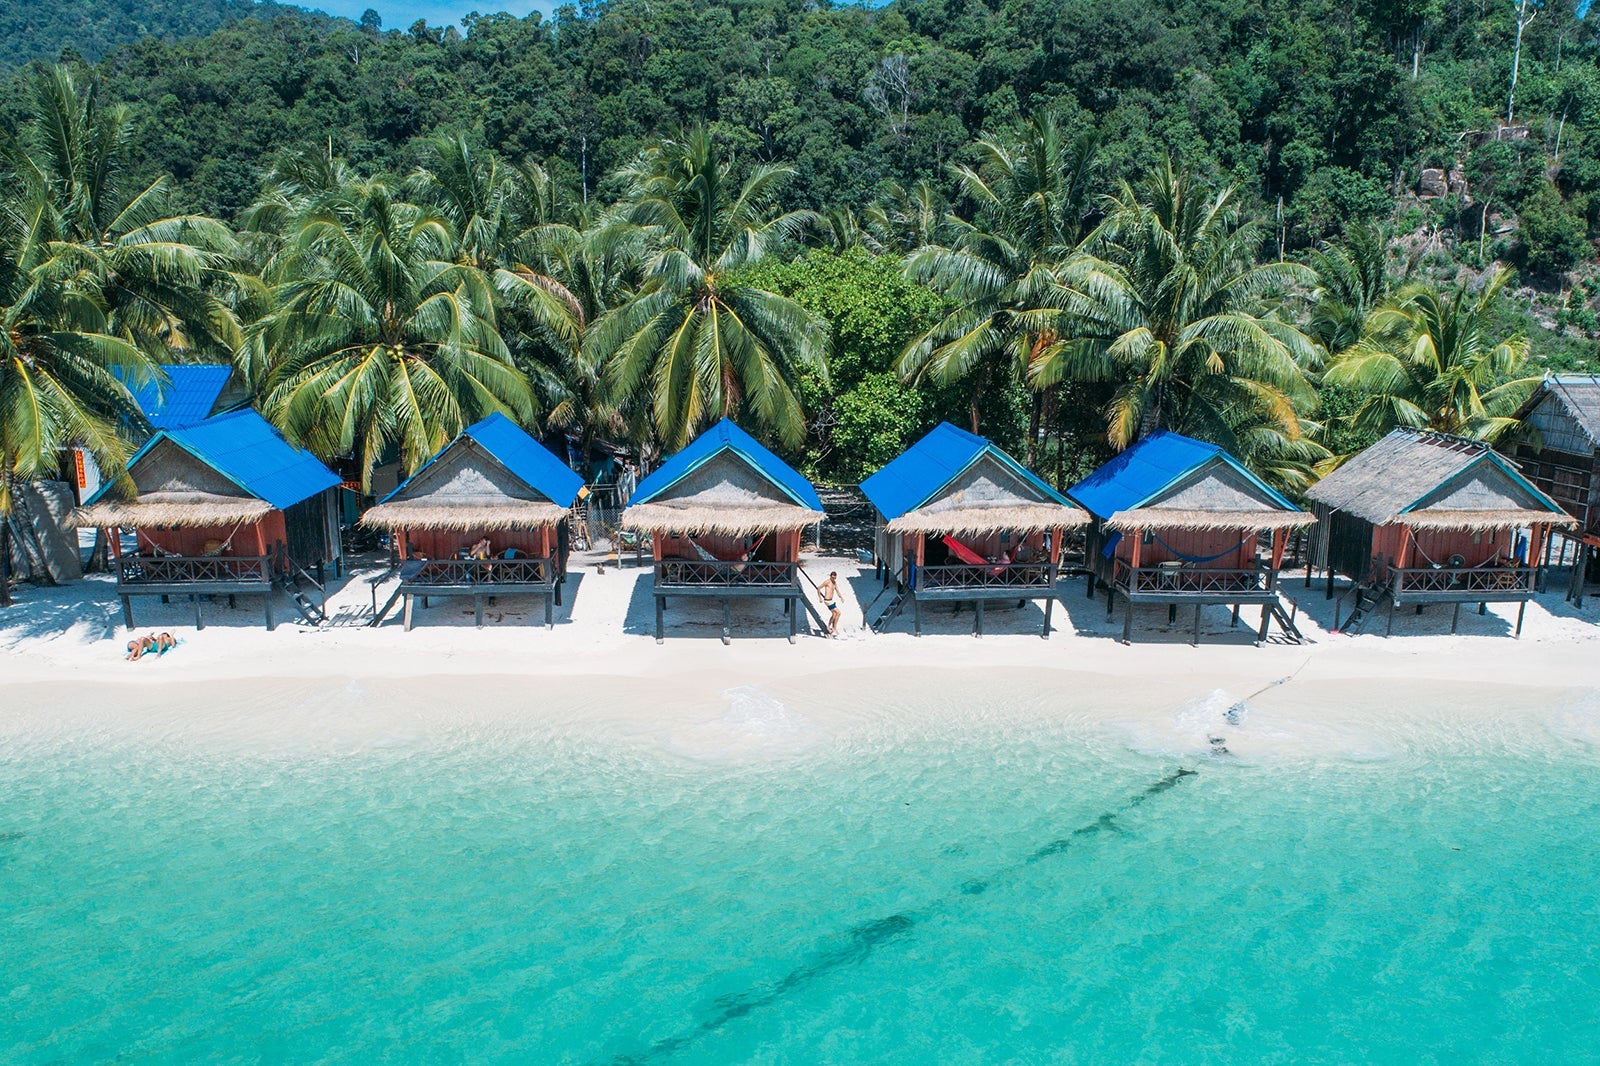 Koh Rong - Can't-Miss Attractions in Cambodia